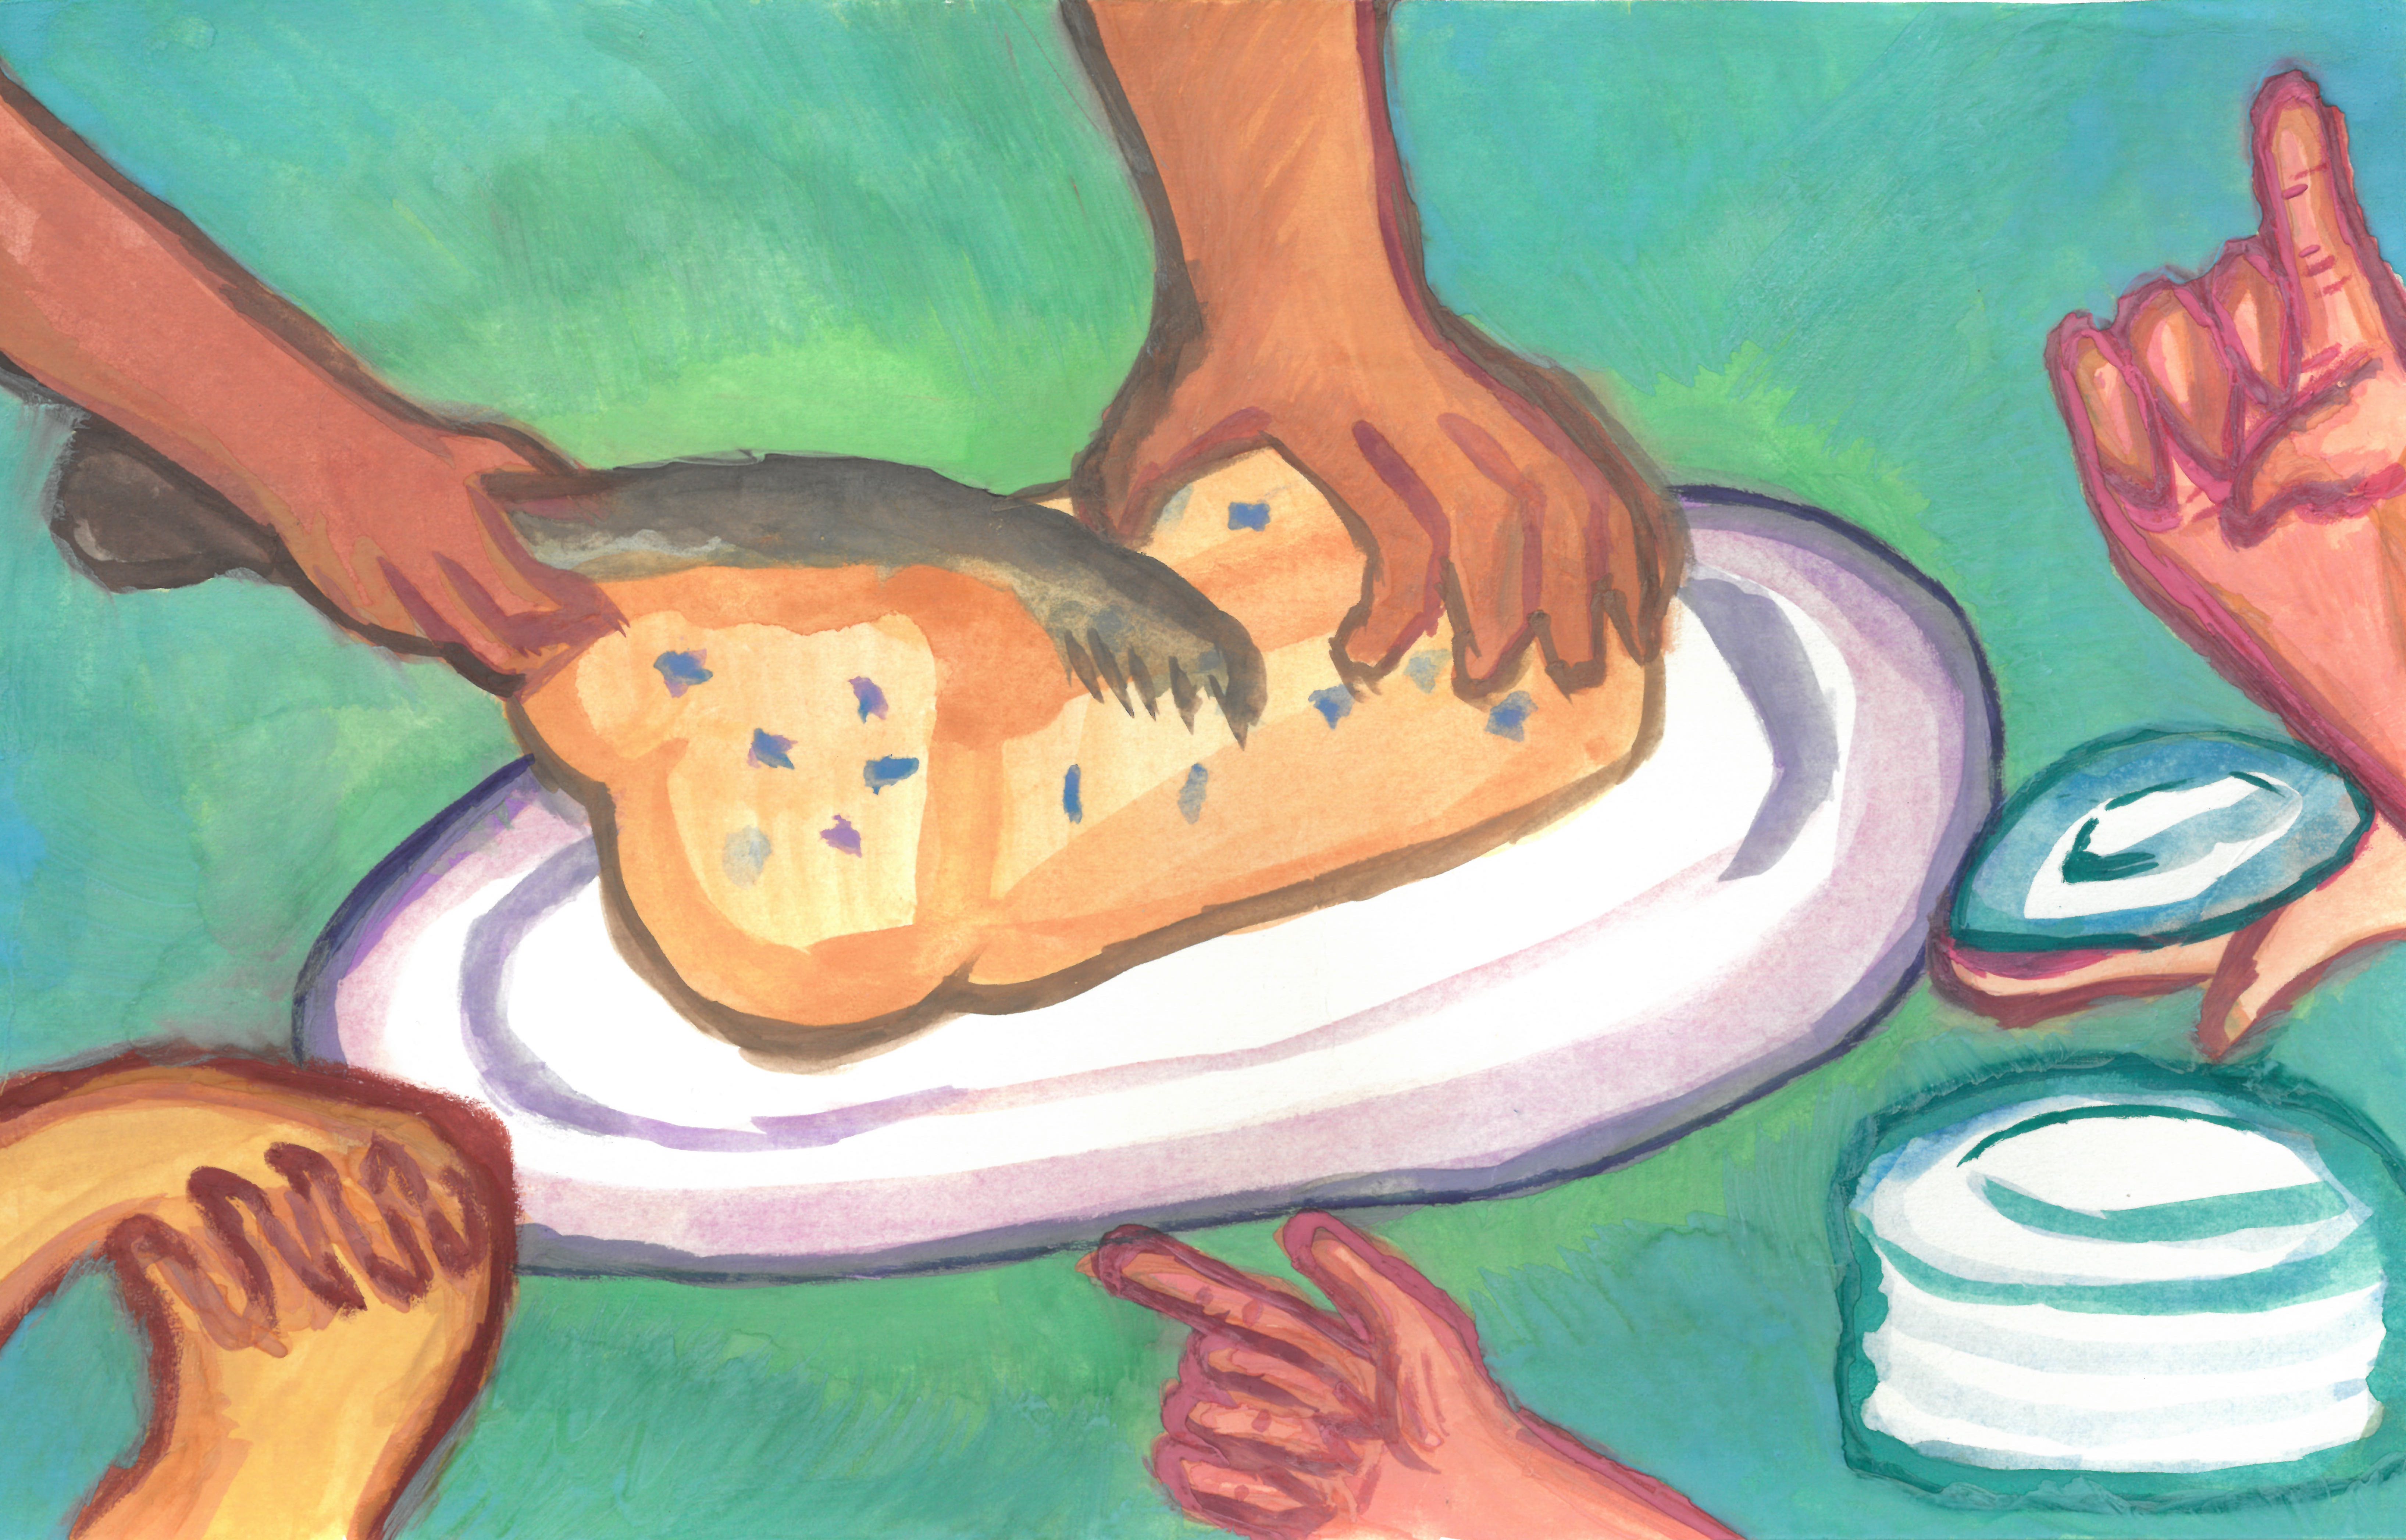 Image is a pastel/chalk style illustration showing bread being cut, with multiple hands holding plates and reaching out for pieces of the bread loaf.